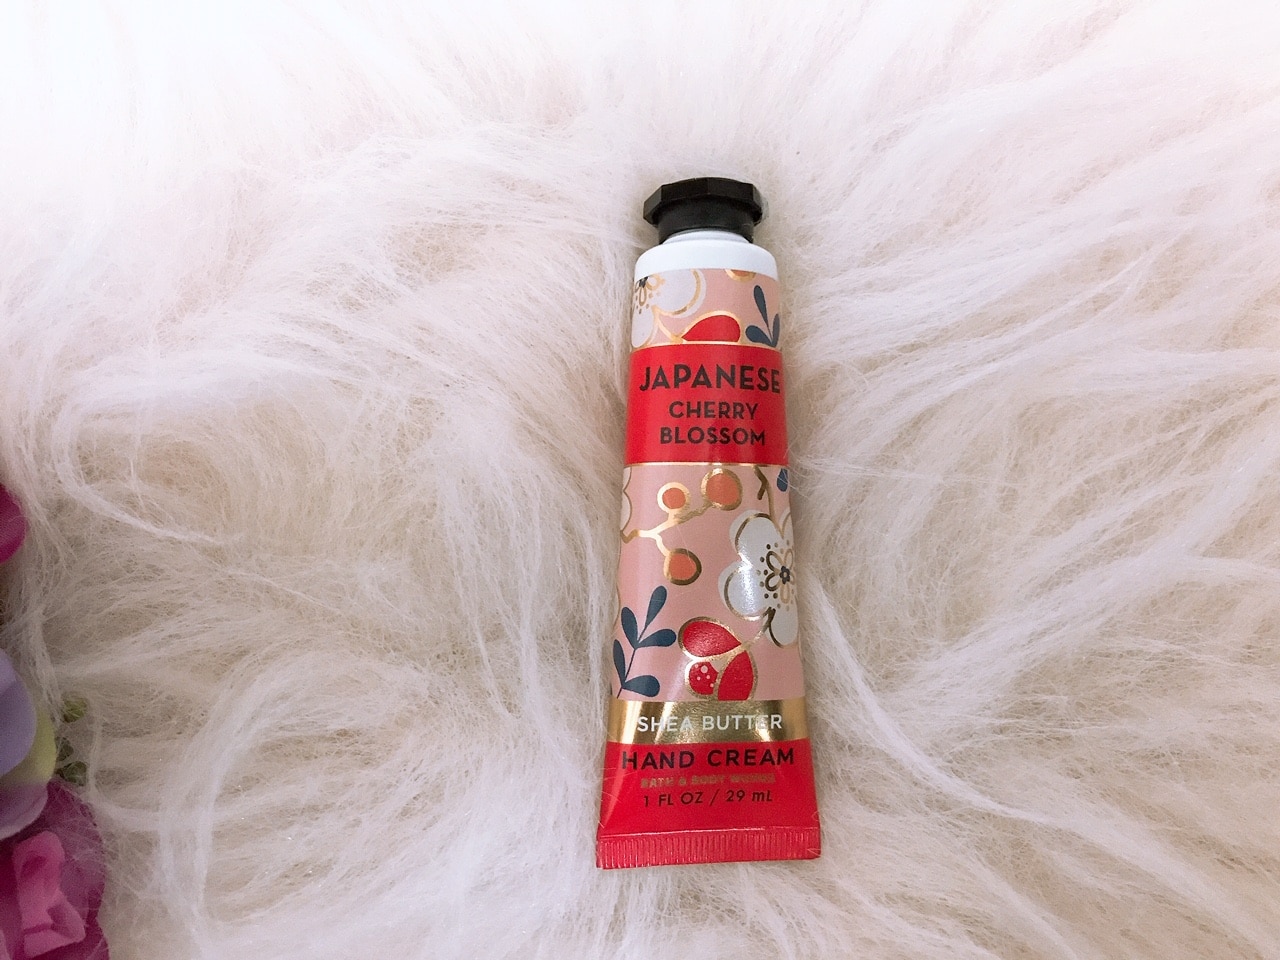 bath and bosy works cherry blossom hand cream review